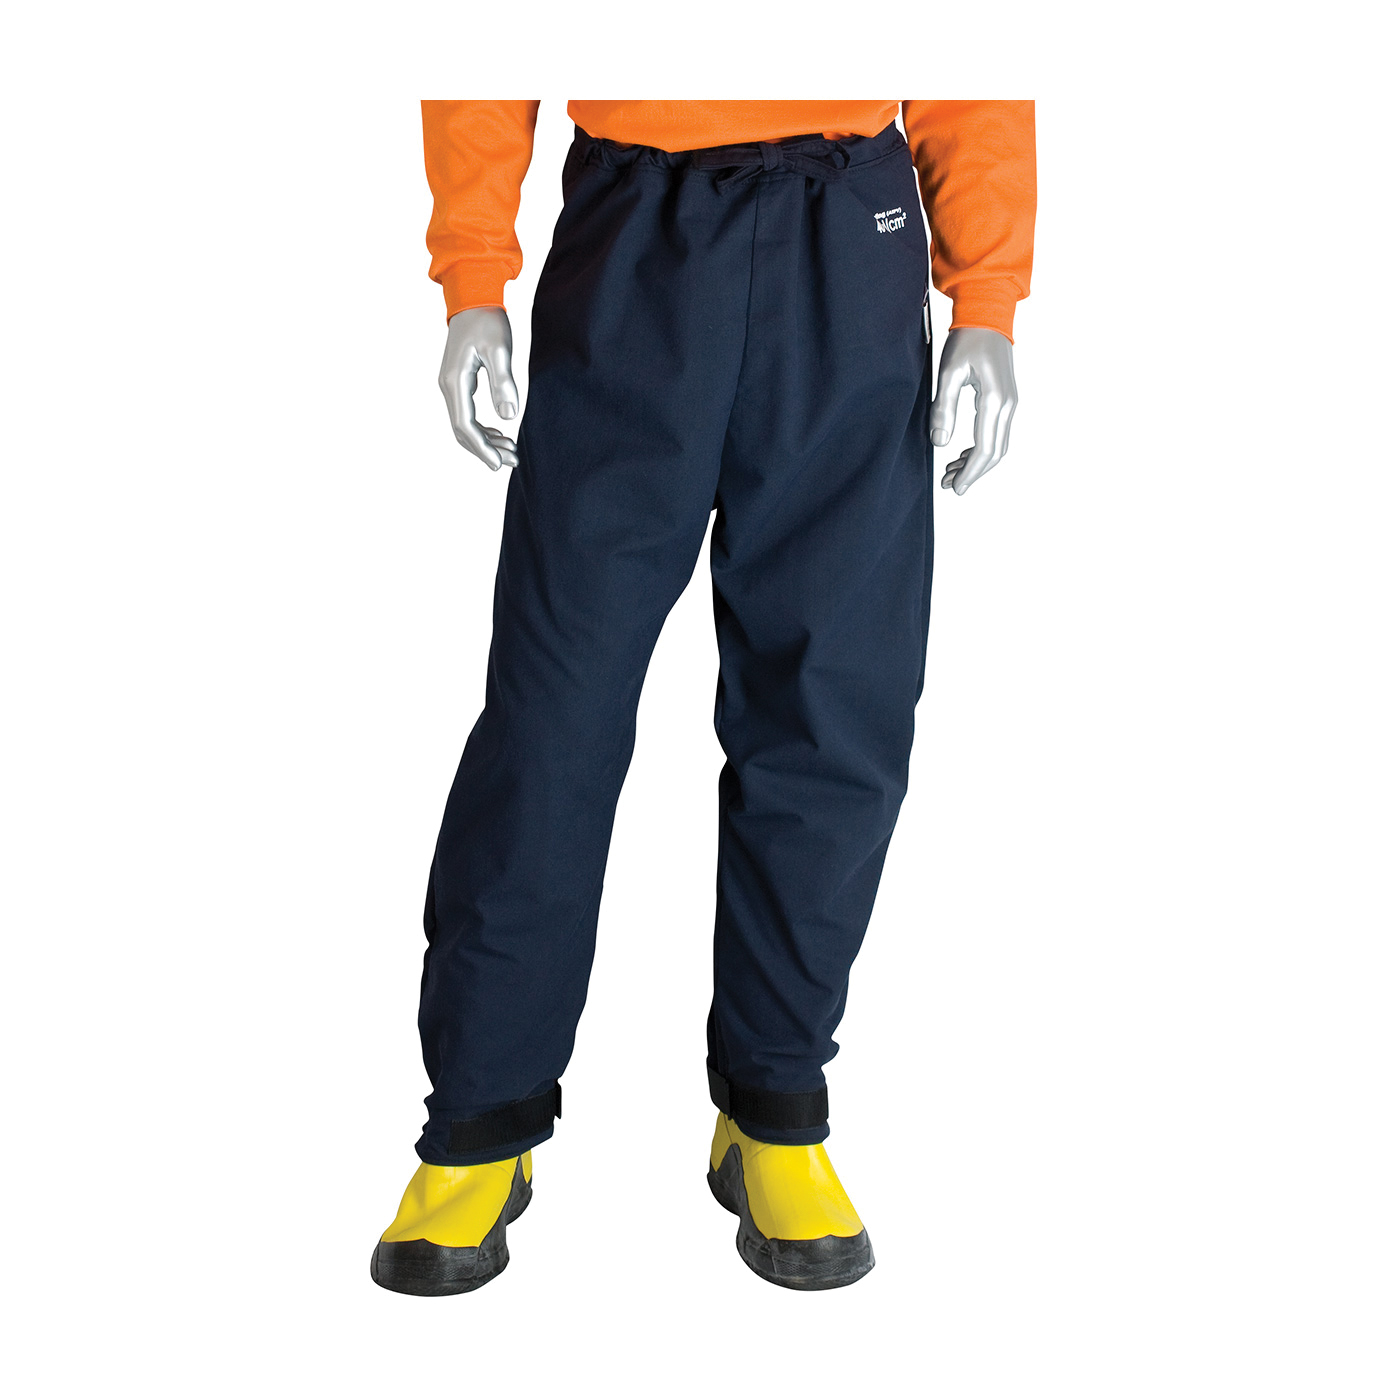 PIP® 9100-530ULT/4X 9100-530ULT Ultralight Flame Resistant Pant, 56 to 58 in Waist, 32 in L Inseam, Navy Blue, DuPont™ Protera®/Westex® UltraSoft® Interlock Knit